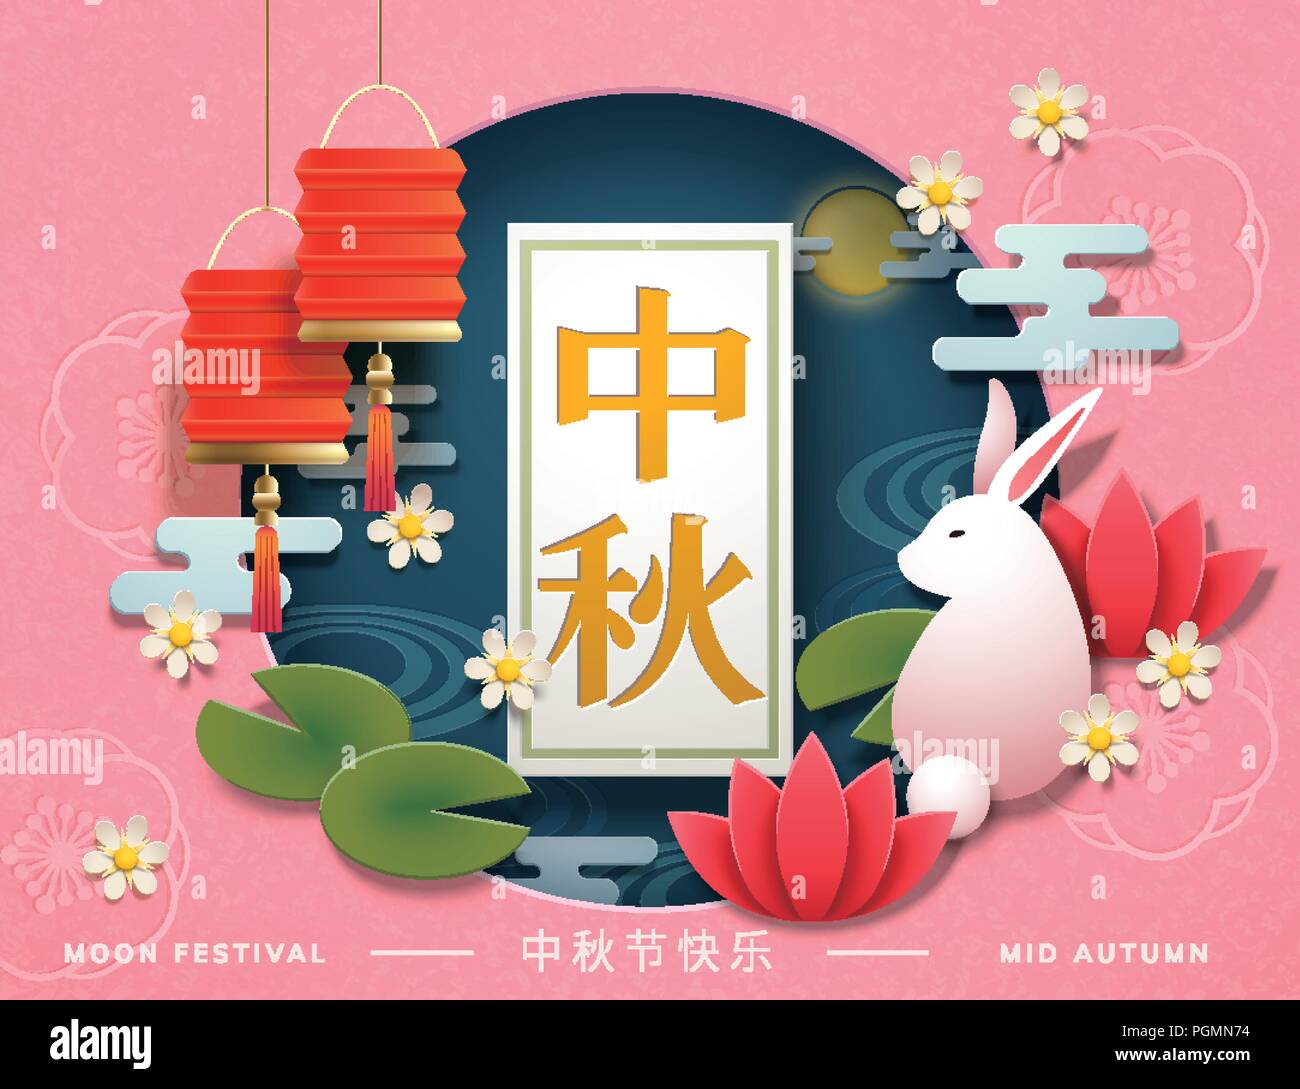 3d Products Podium Mid Autumn Festival Holiday Or Chinese New Year, Chinese  Festivals Vector Design With Paper Art ,flower, Moon, Rabbit, And Asian  Elements With Craft Style On Background. Royalty Free SVG